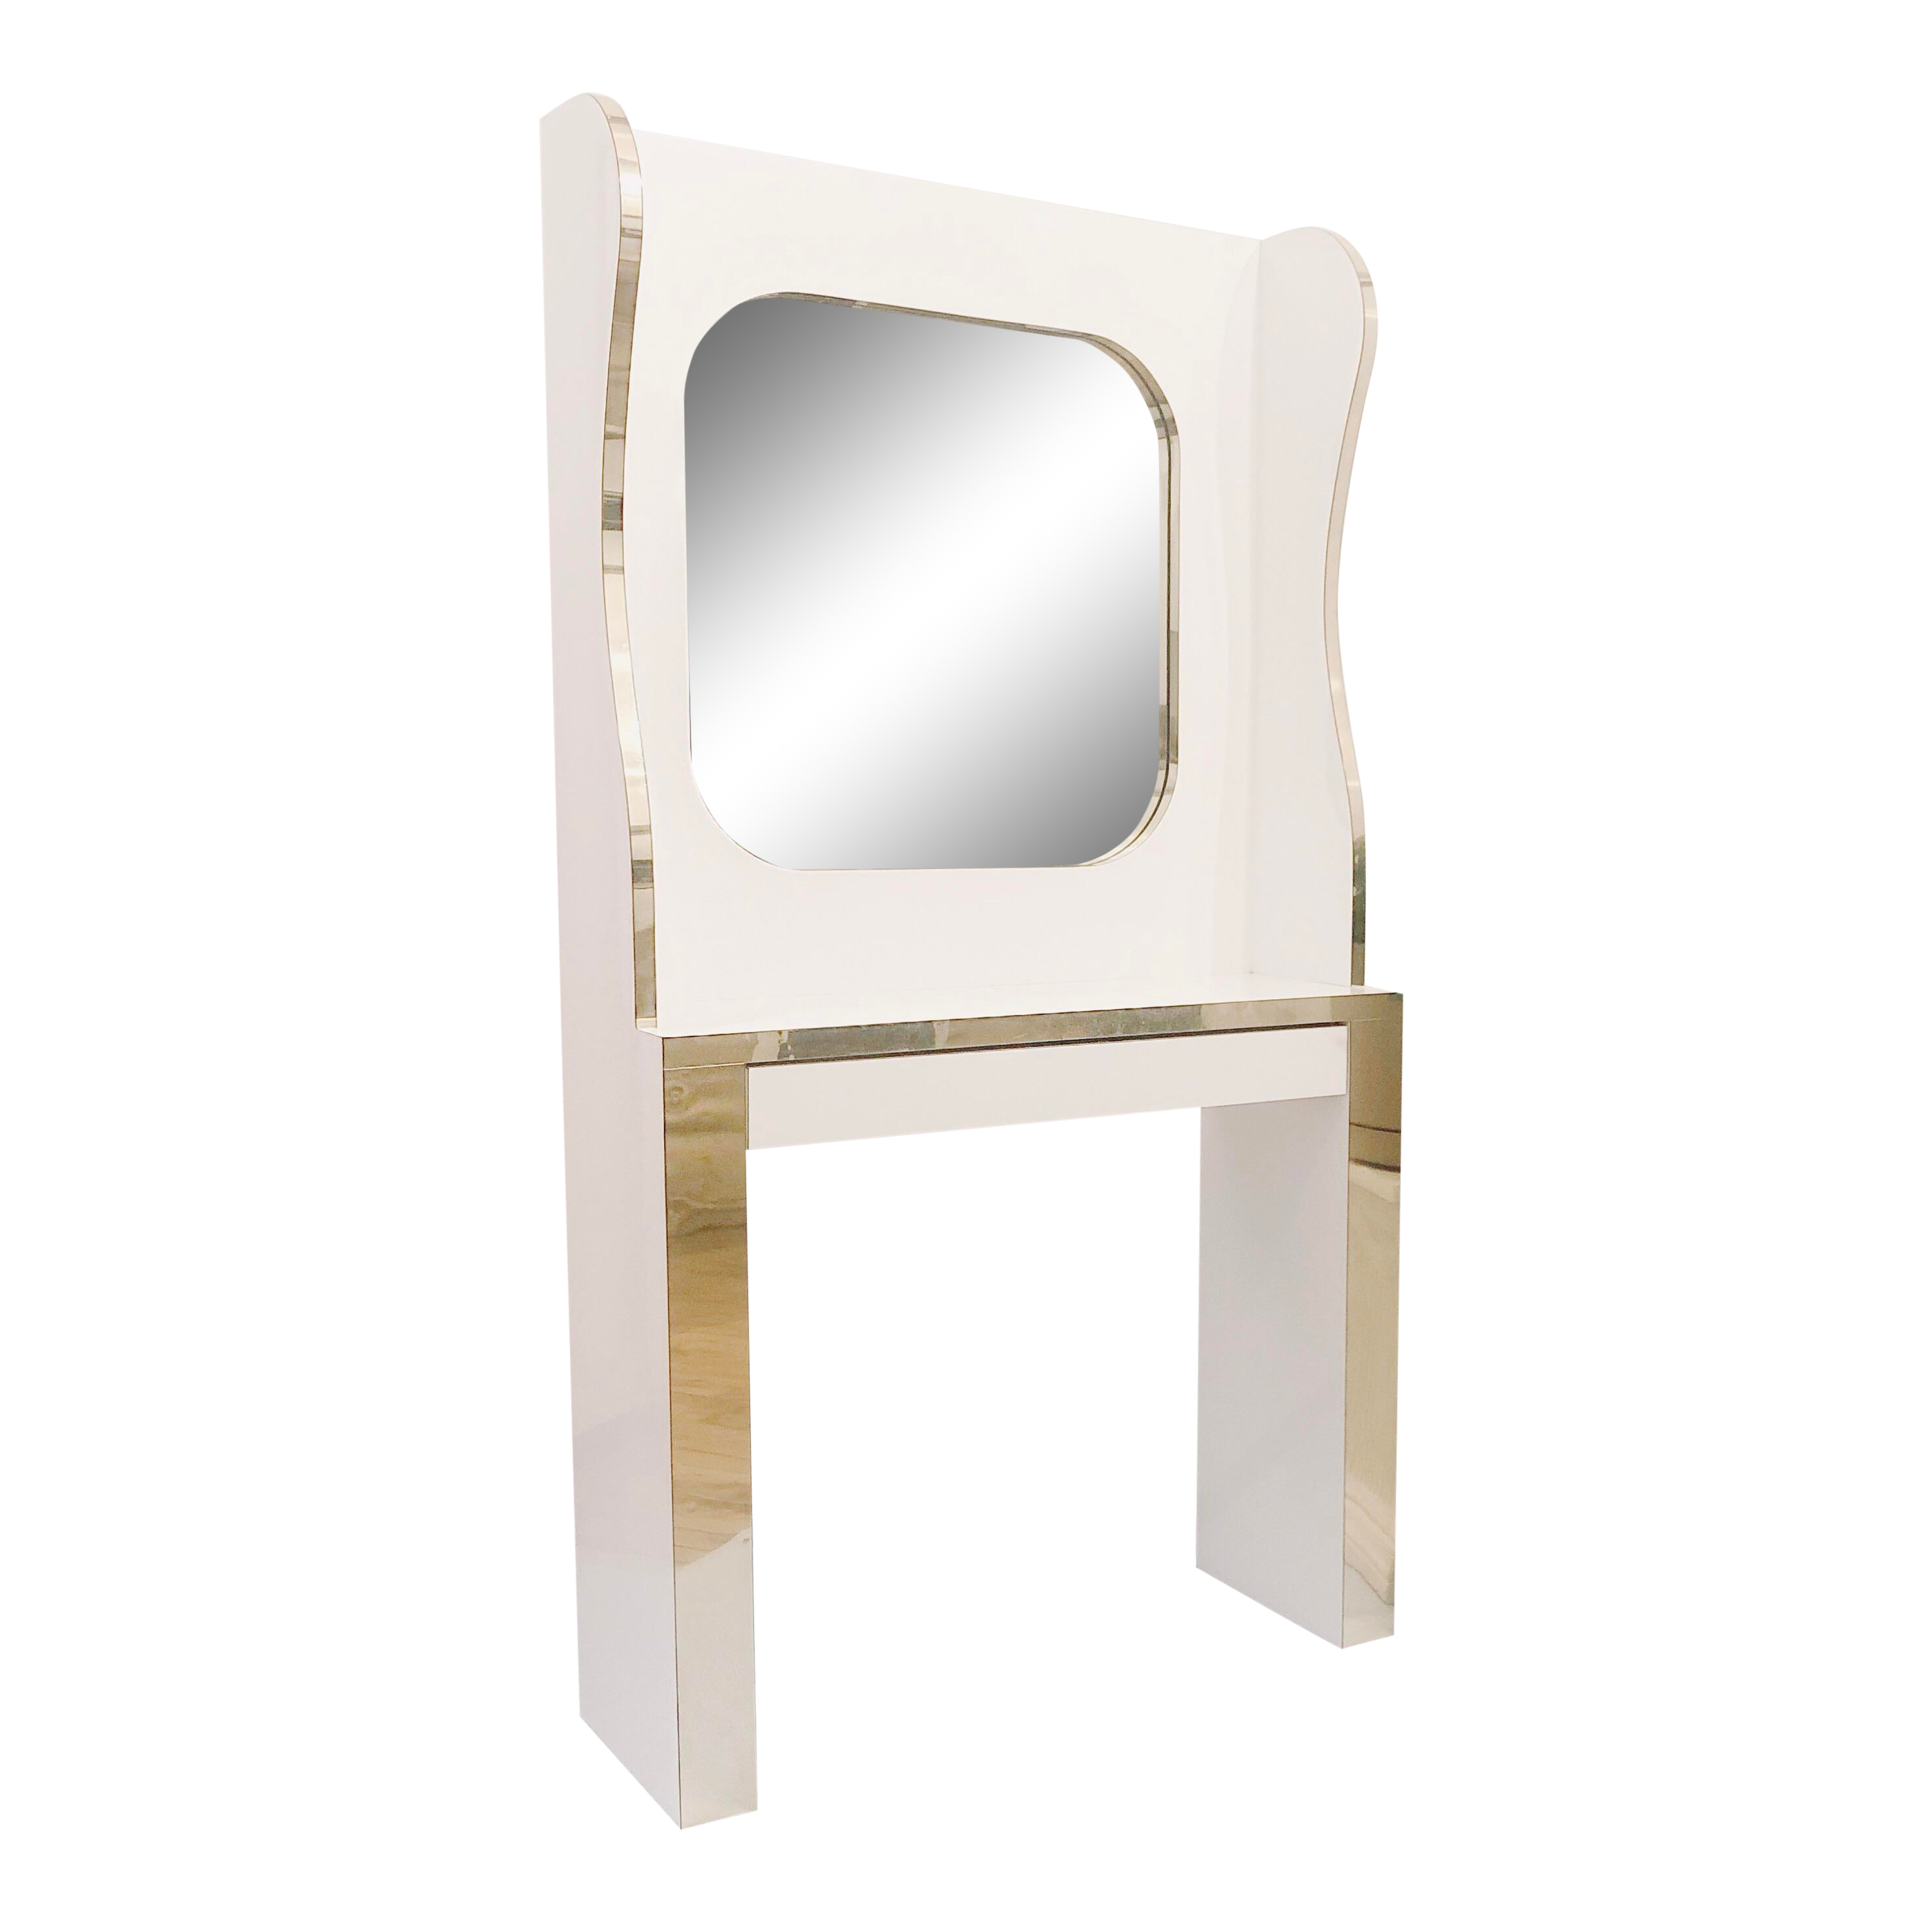 1980s Vintage White Lacquer Laminate _ Gold Trim Vanity With Mirror